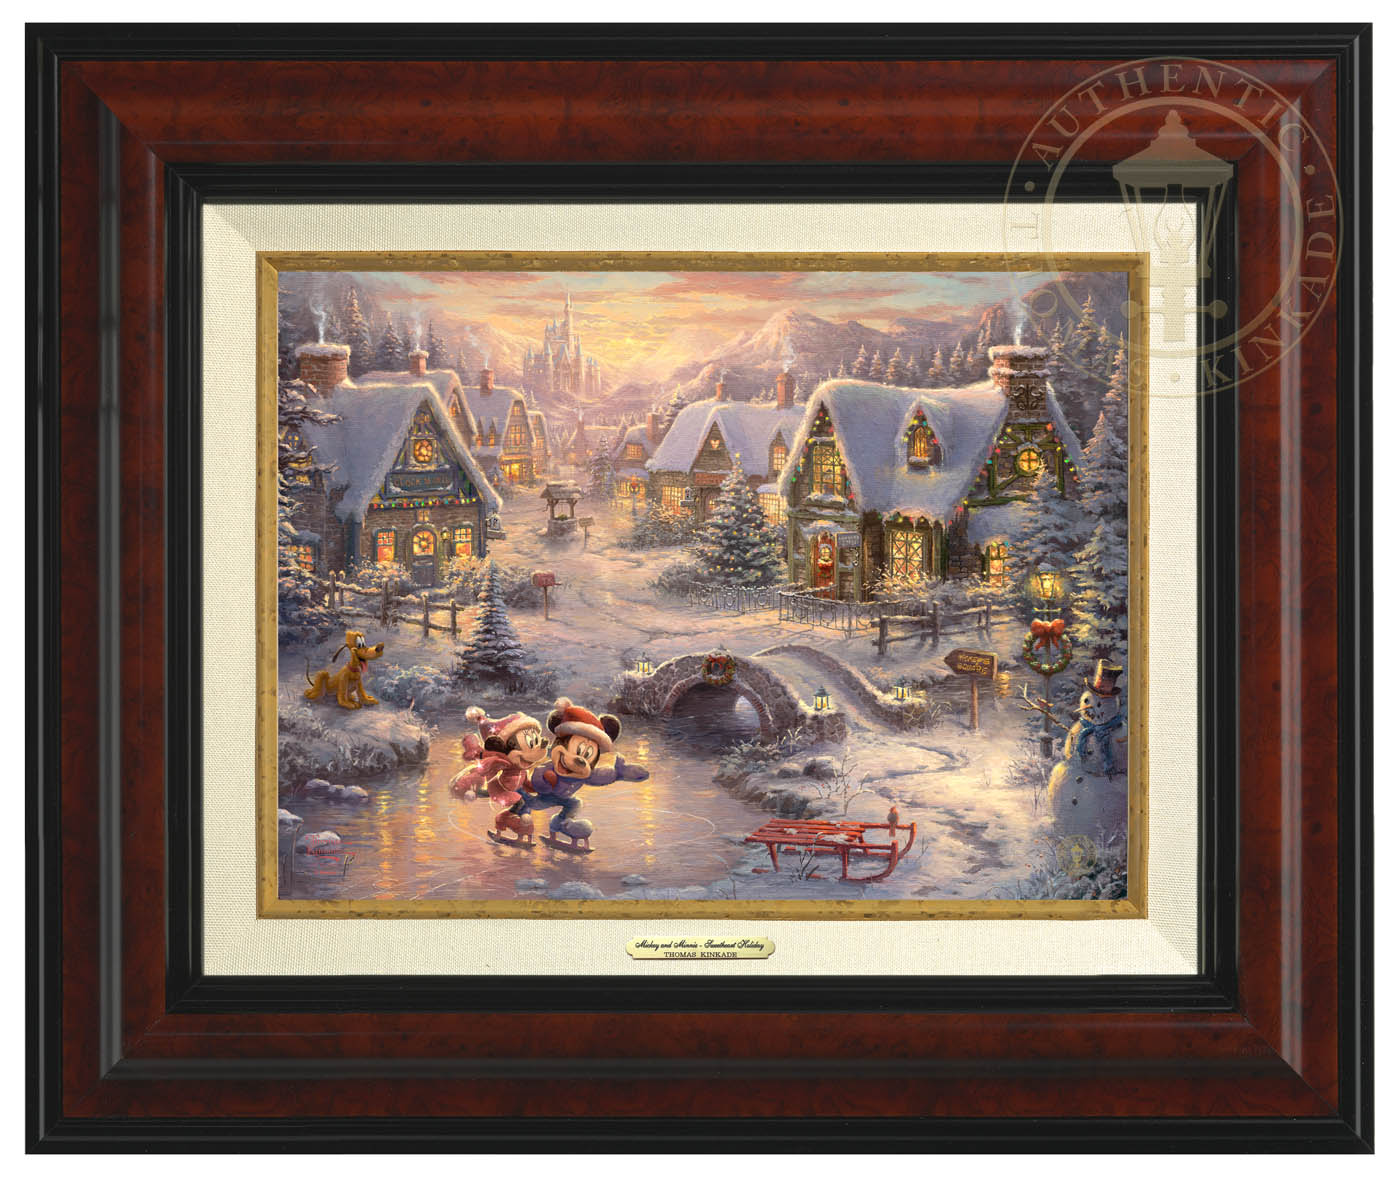 Mickey Mouse and Minnie Mouse joyfully skate across a frozen pond, celebrating the magic of the Holidays together. Burl Frame